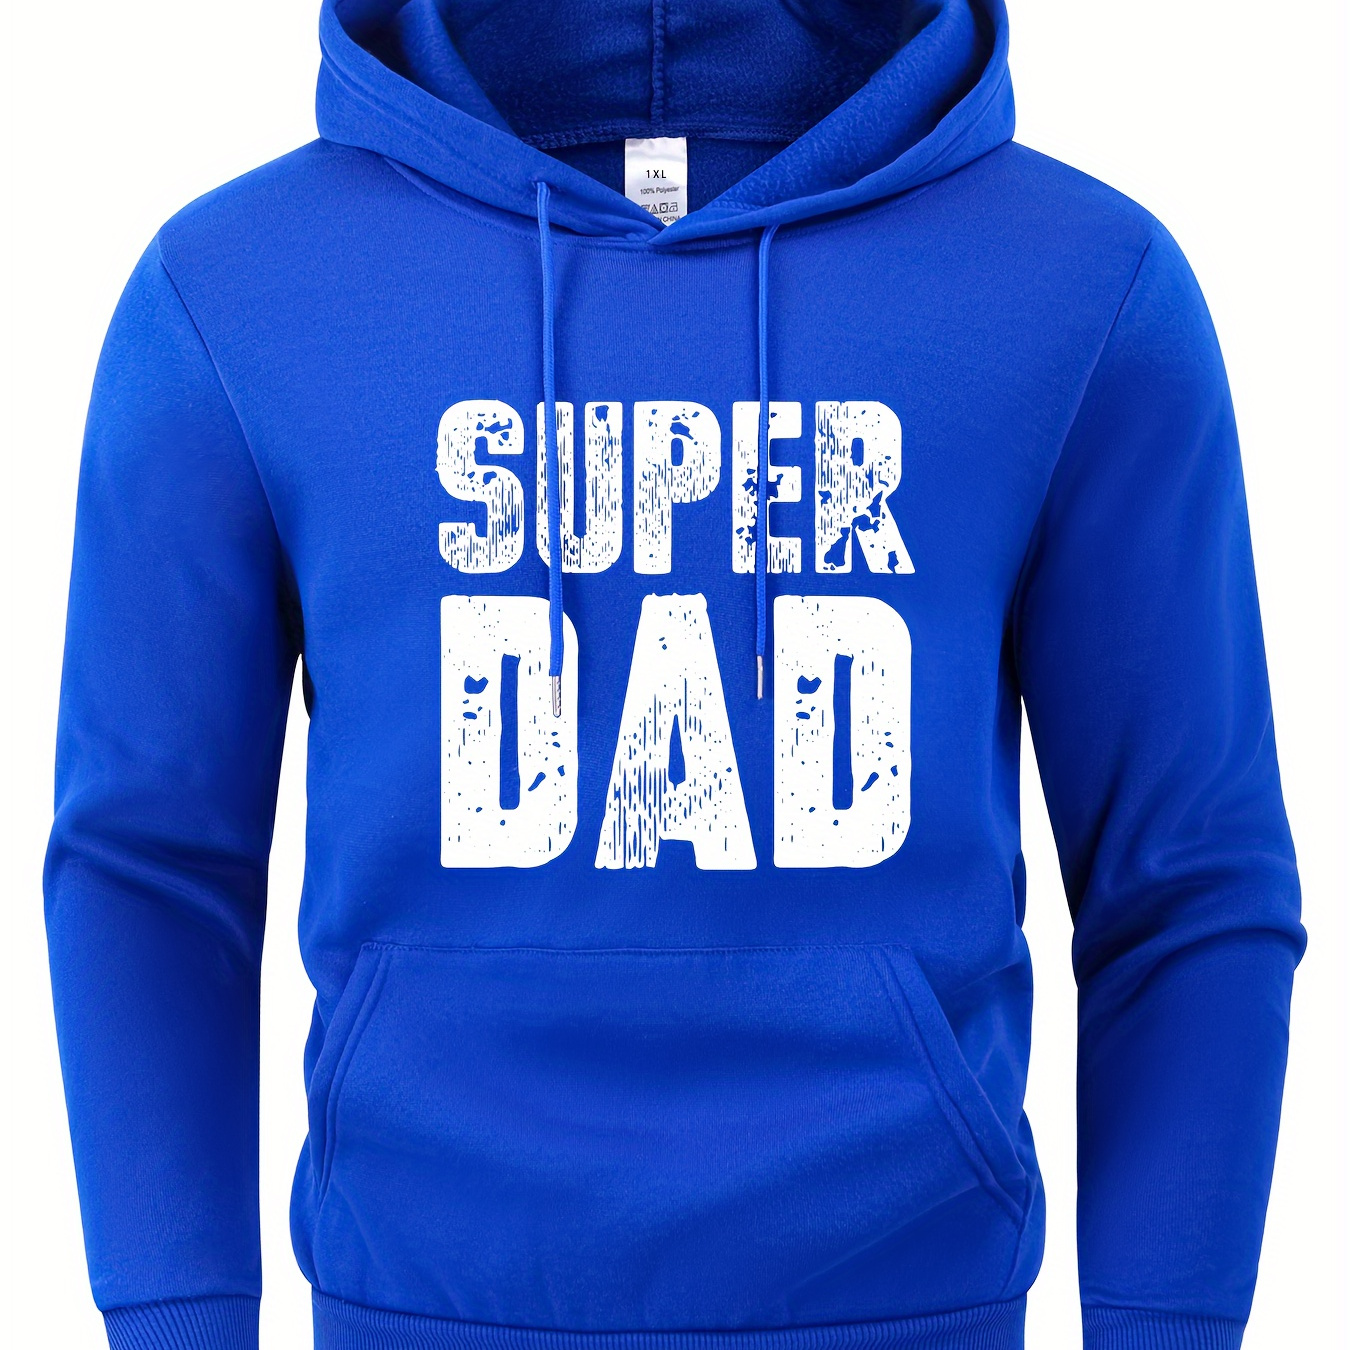 

Super Dad Print Hoodie, Cool Long Sleeve Hoodies For Men, Men's Casual Creative Graphic Design Pullover, Hooded Streetwear Sweatshirt With Kangaroo Pockets For Fall And Winter, As Gifts